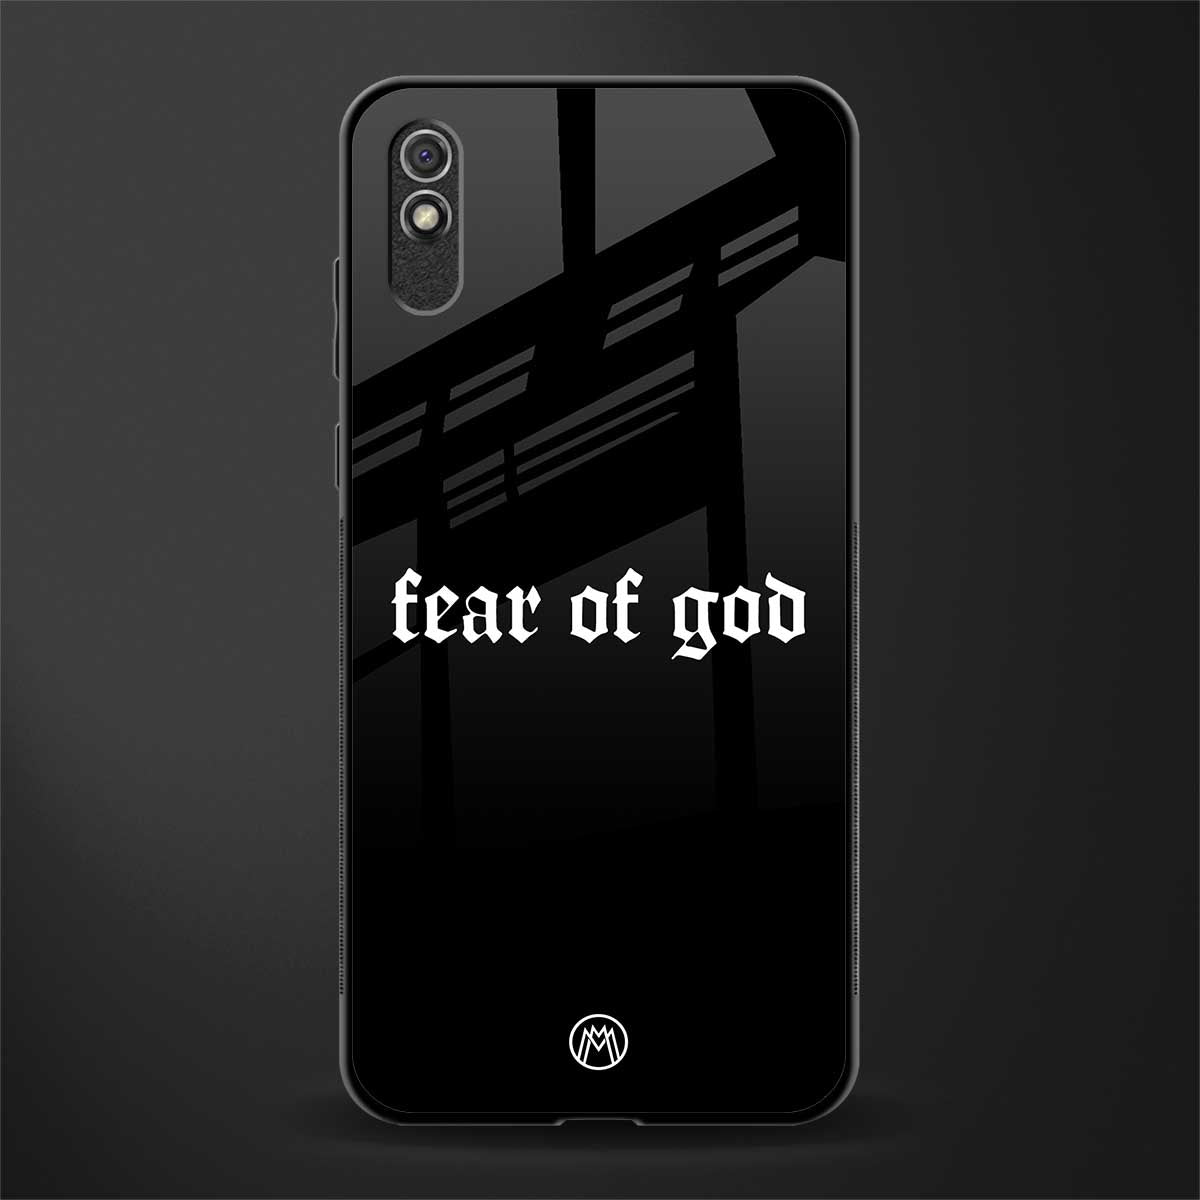 fear of god phone cover for redmi 9a